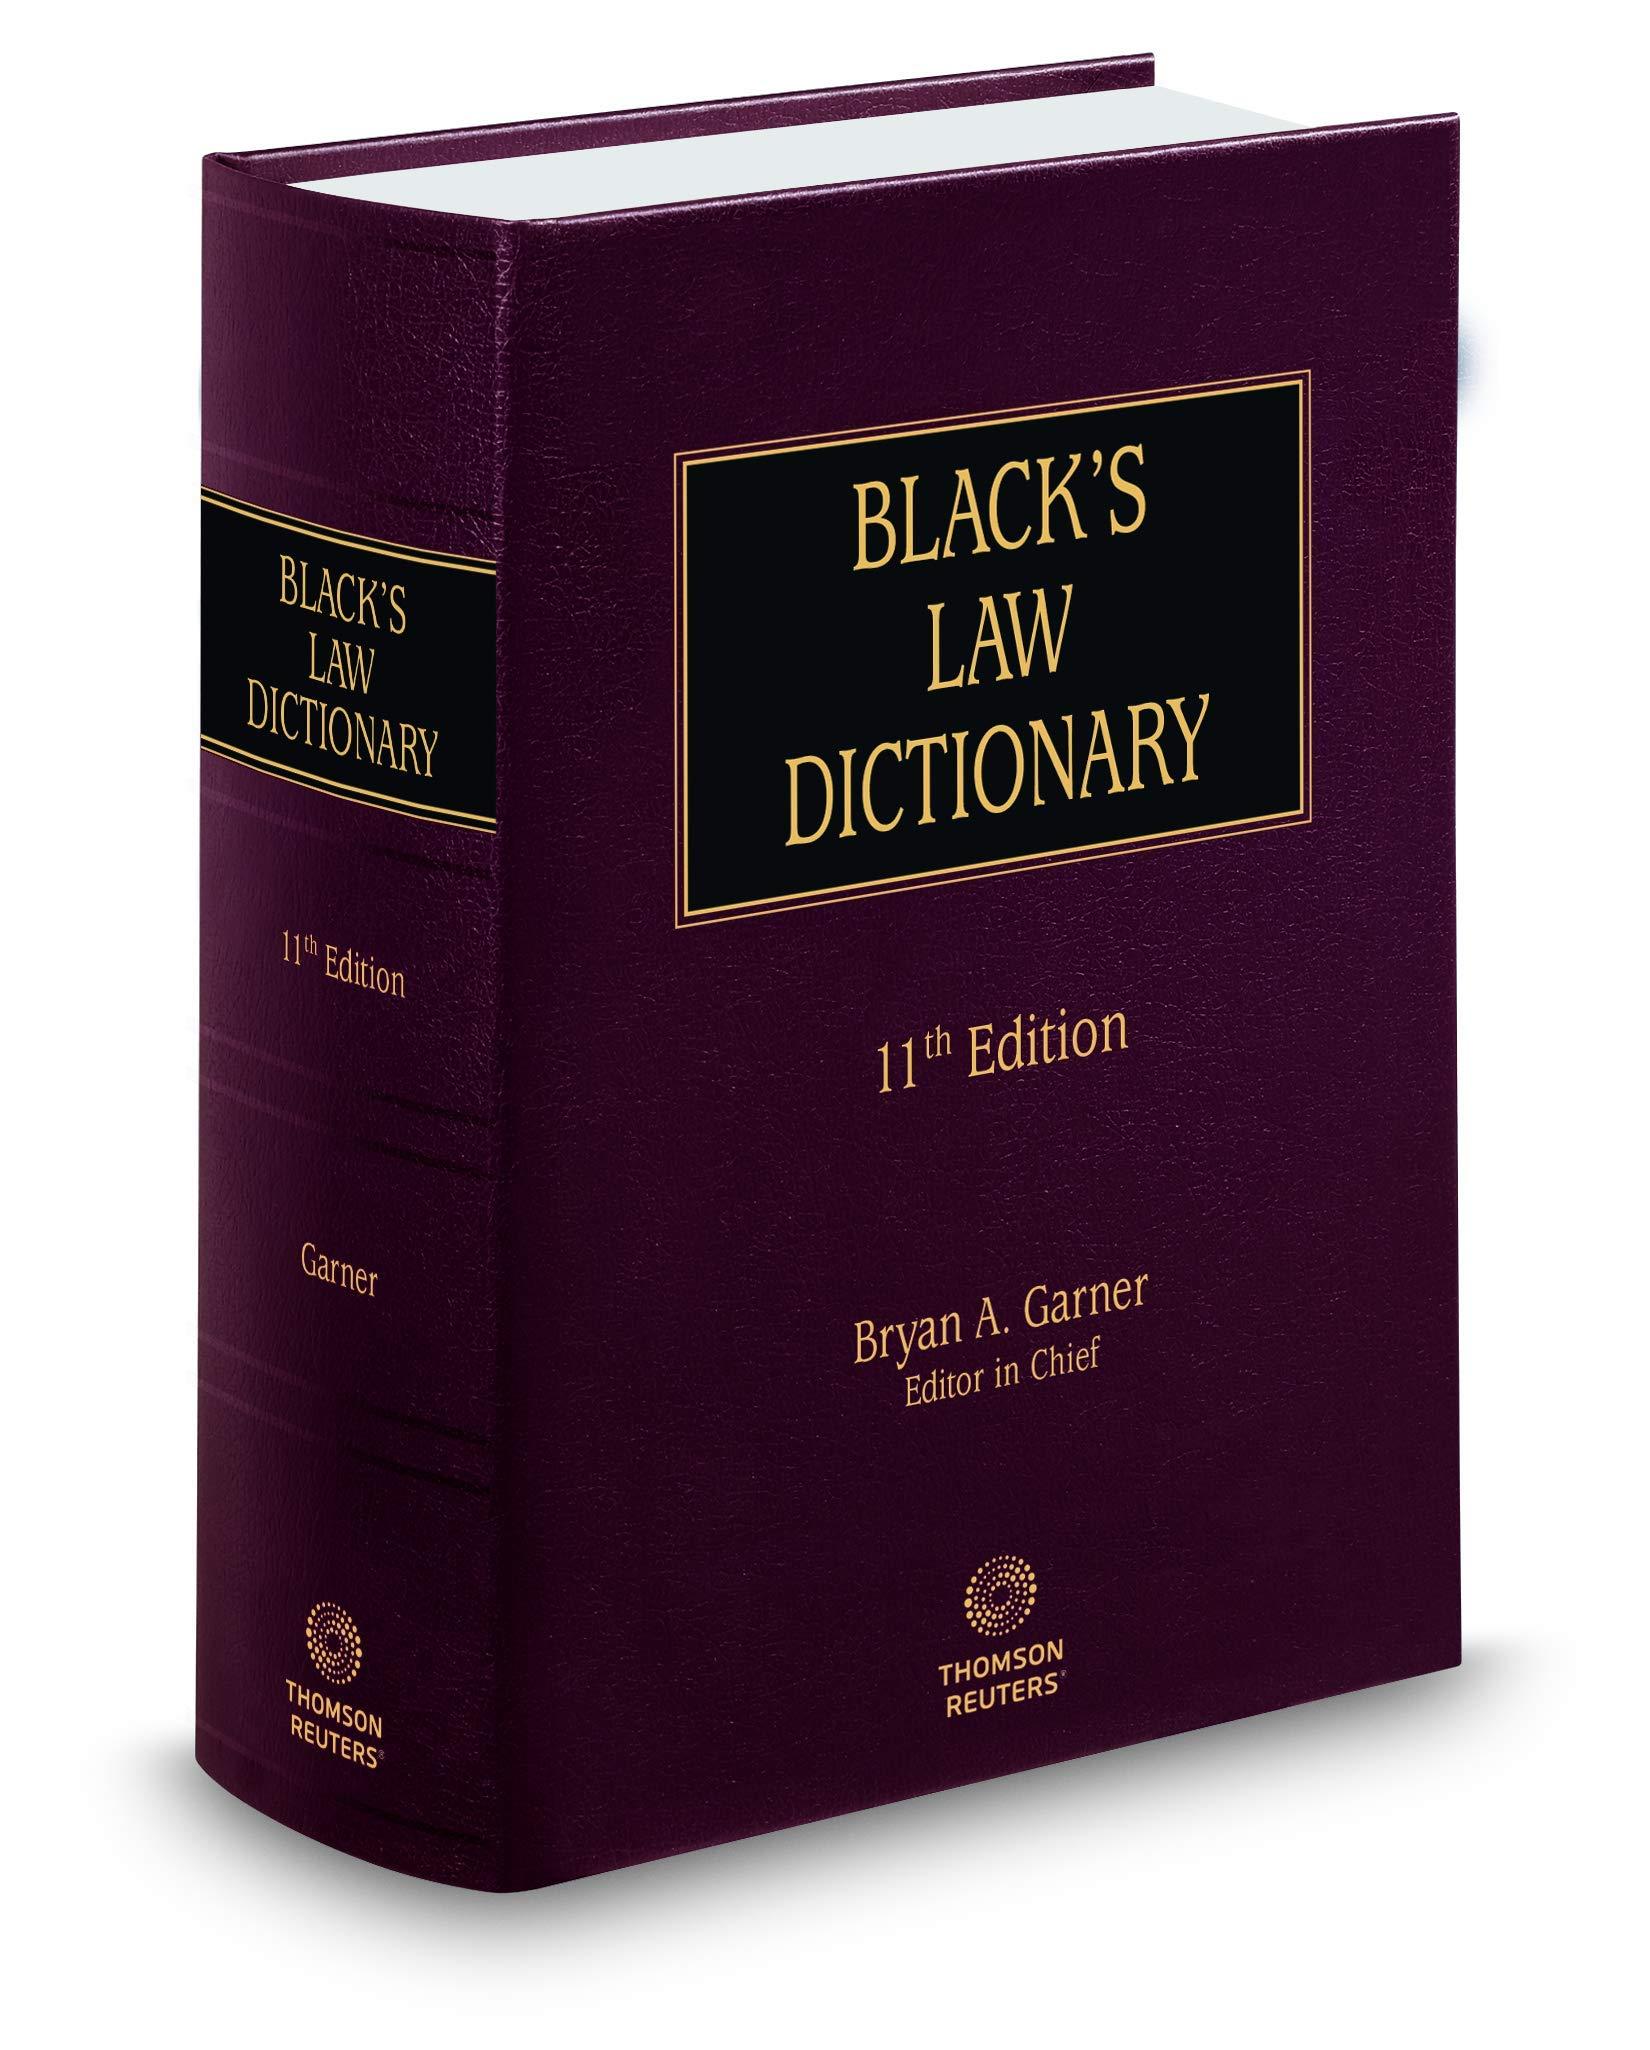 law dictionary pdf download free